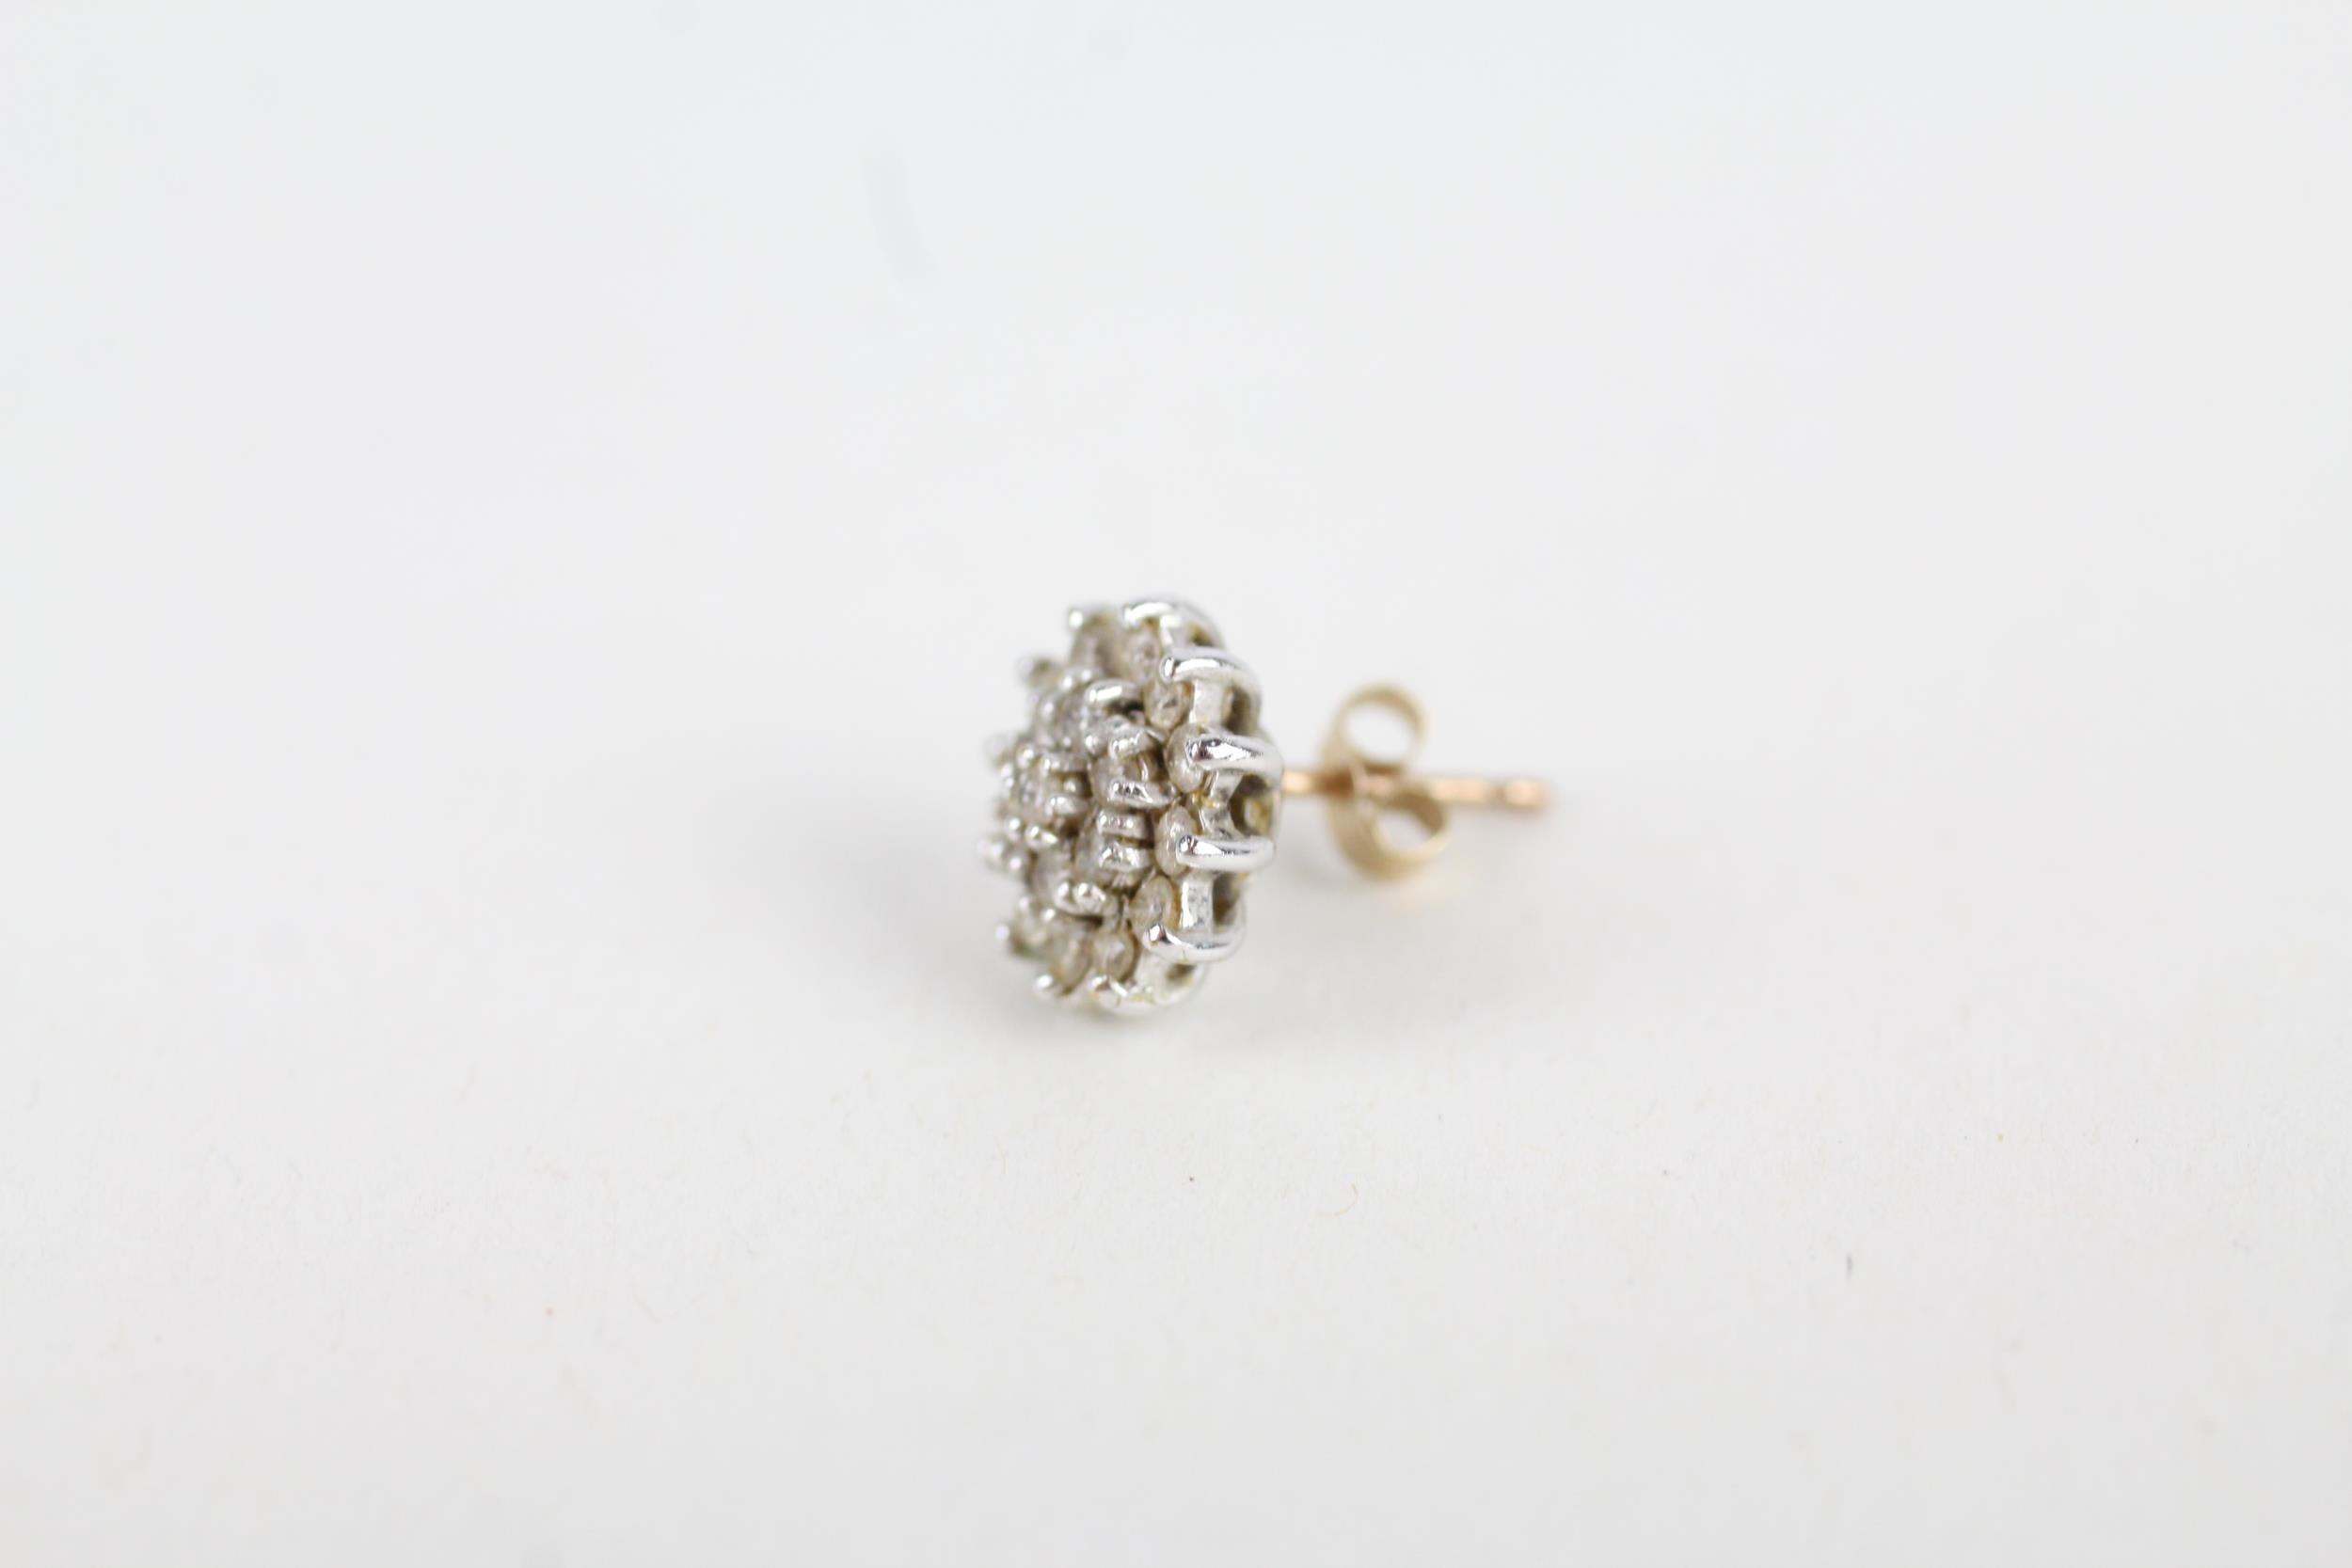 9ct gold diamond cluster stud earrings ( as seen) 2.3 g - Image 3 of 4